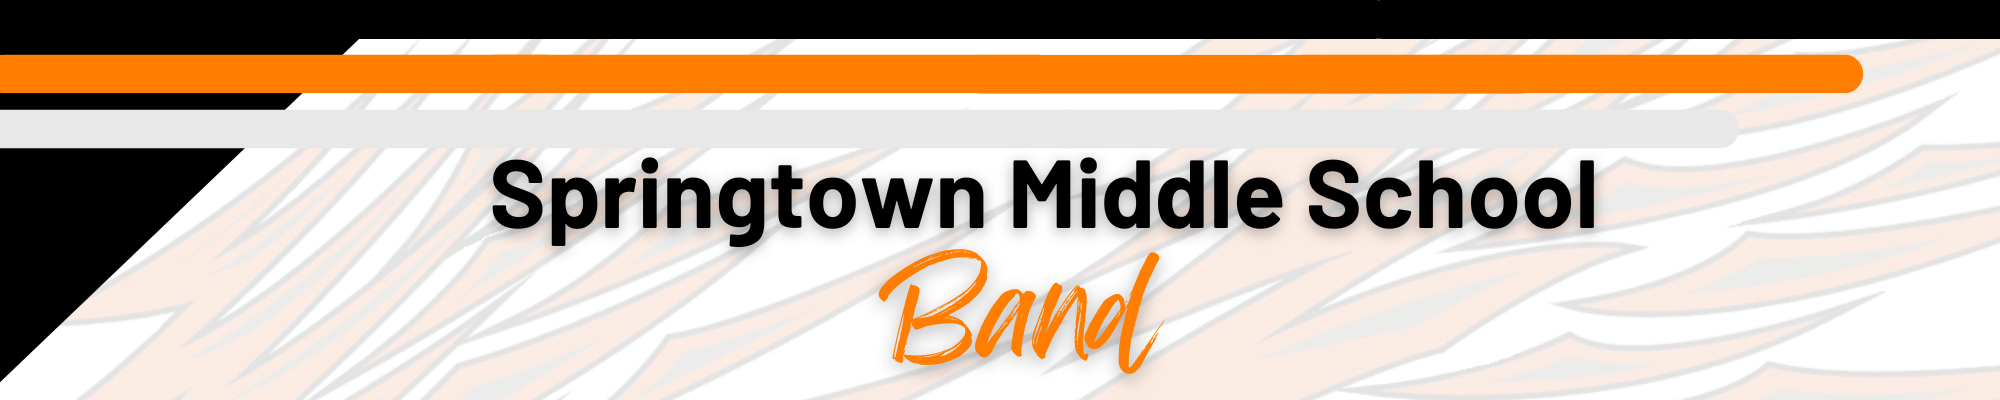 Springtown Middle School Band Banner